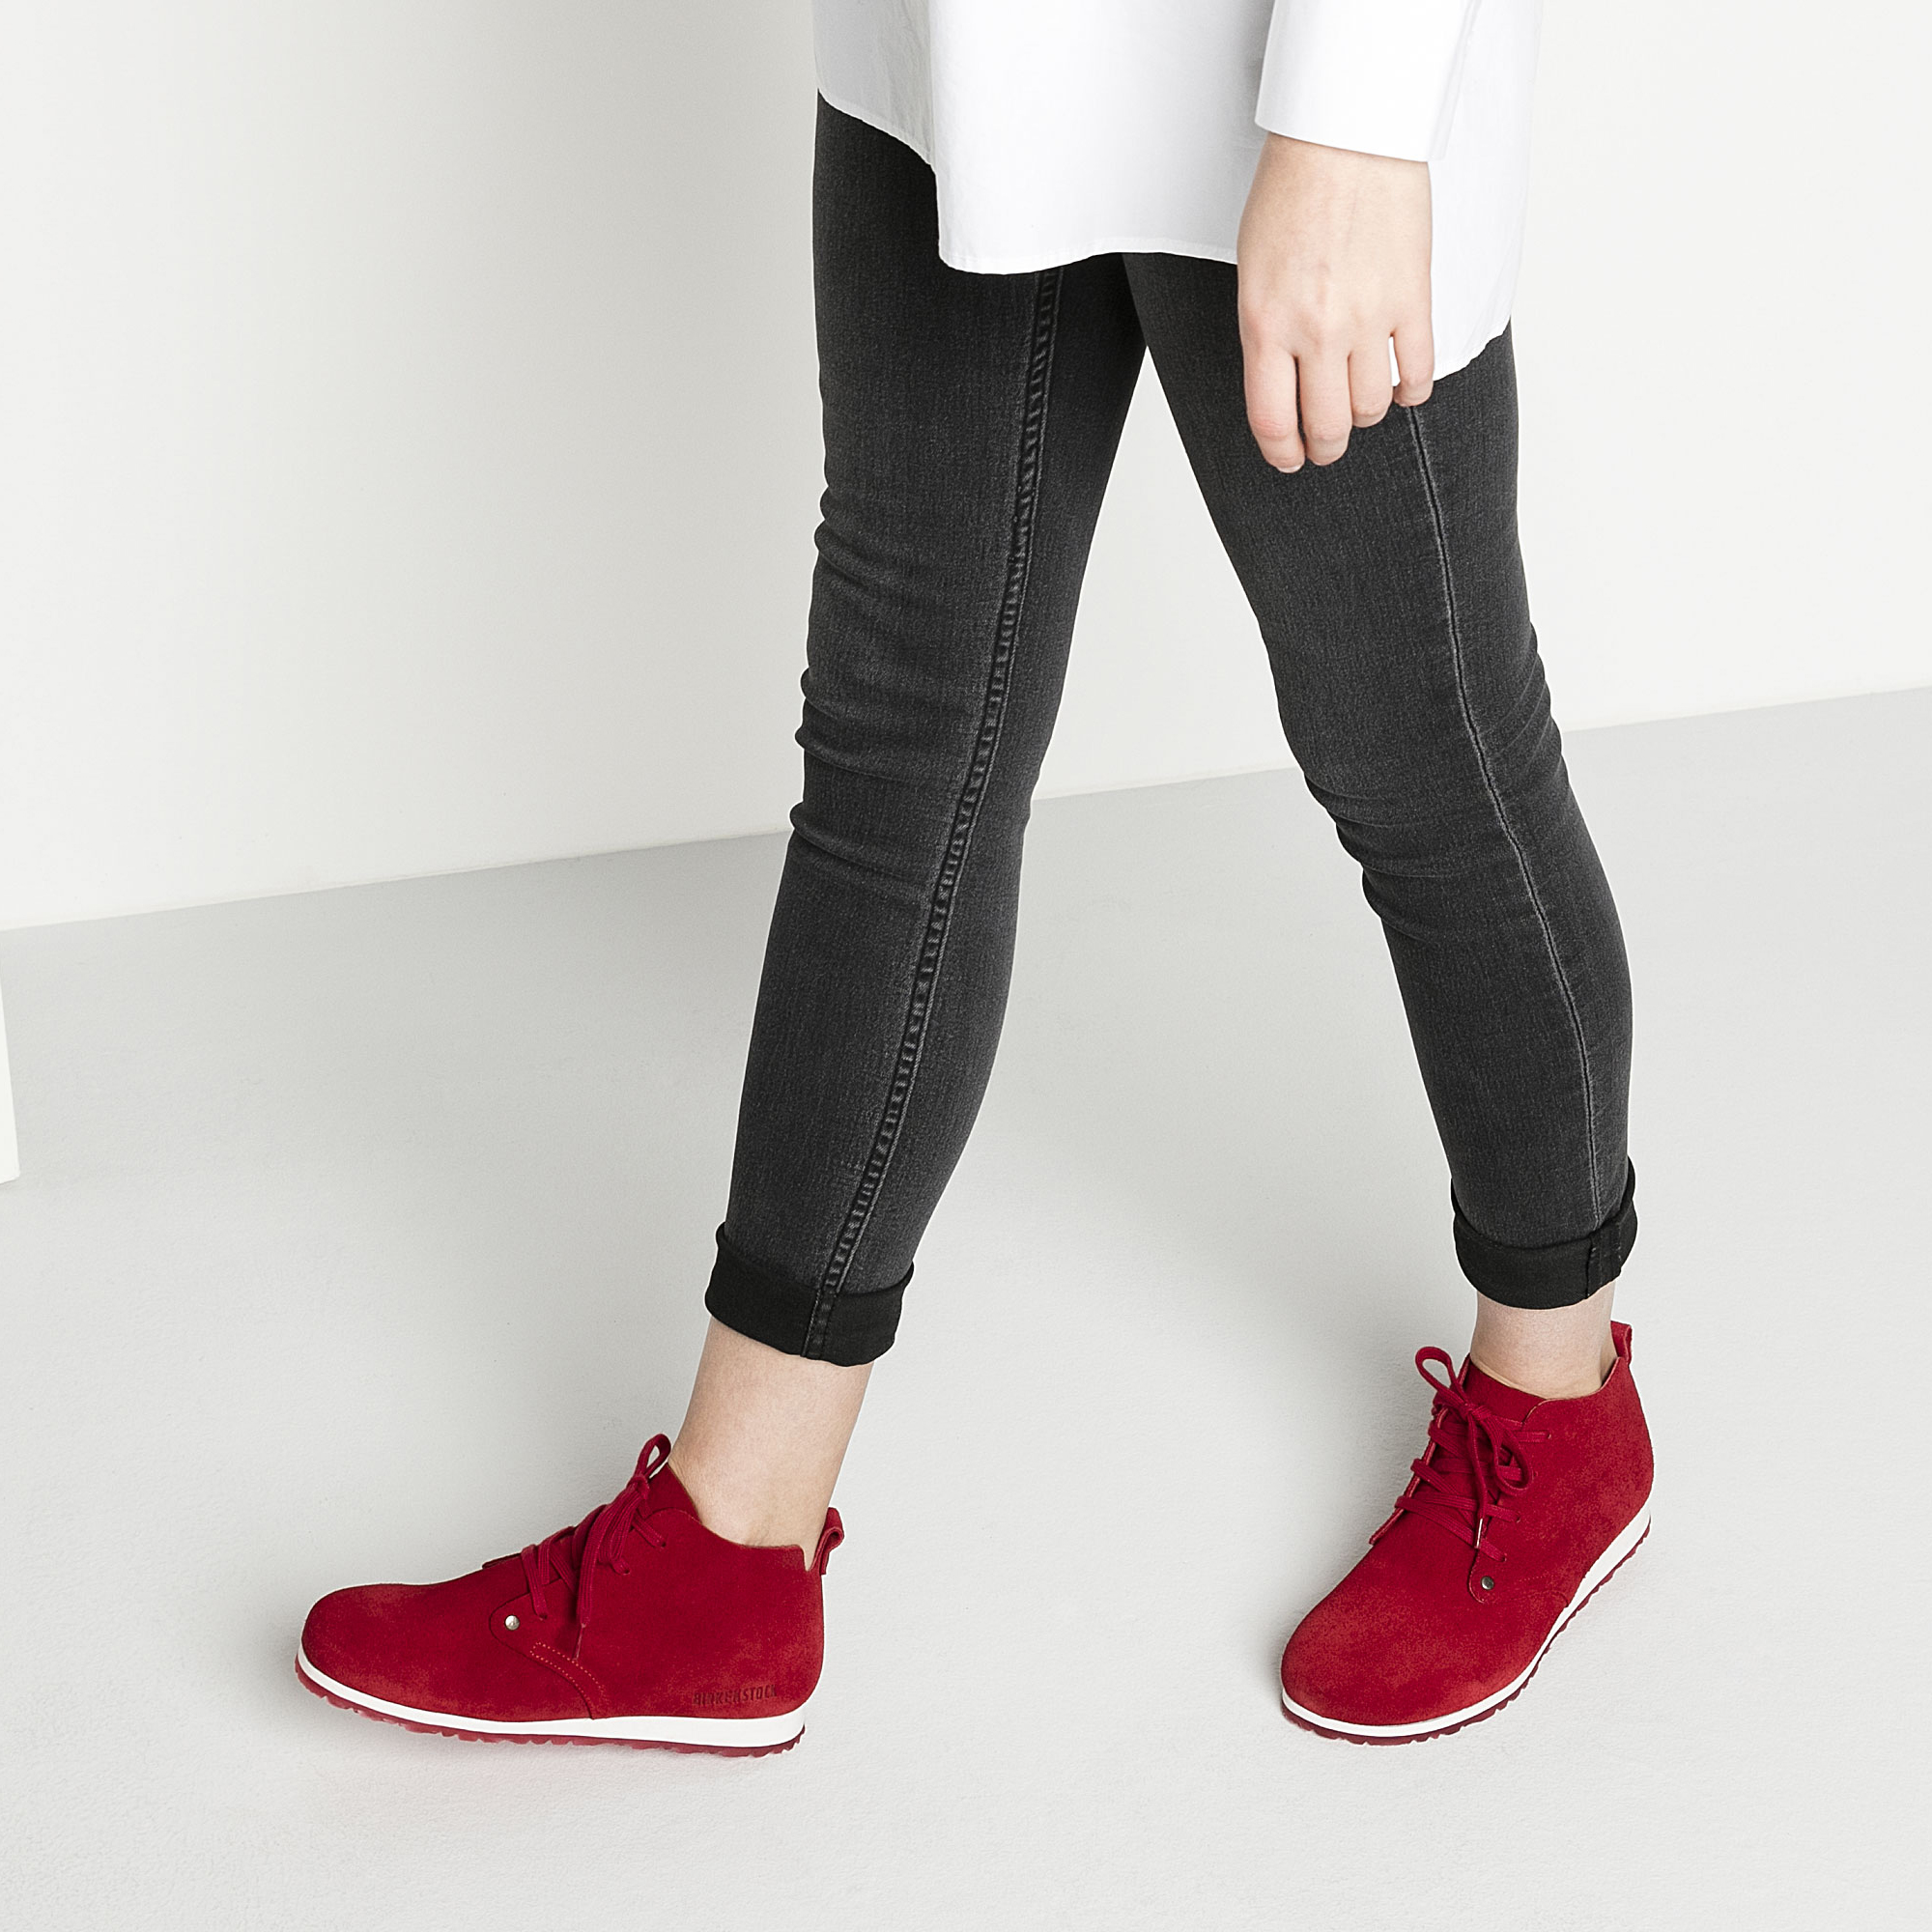 Dundee Plus Suede Leather Red | shop 